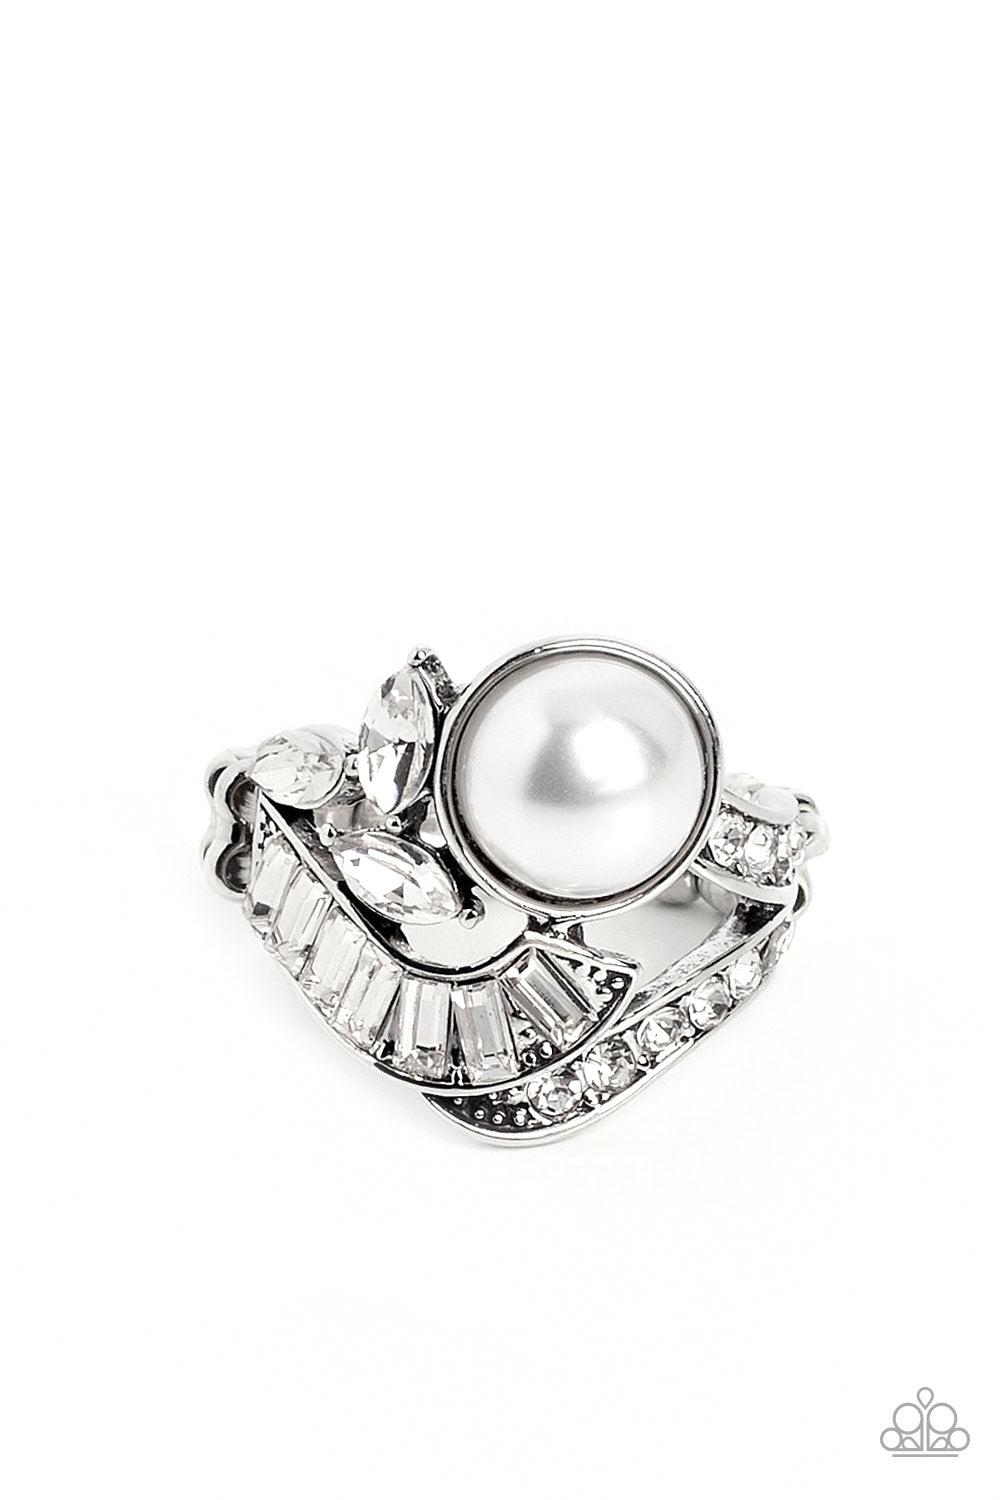 SELFIE-Made Millionaire White Pearl Ring - Paparazzi Accessories- lightbox - CarasShop.com - $5 Jewelry by Cara Jewels